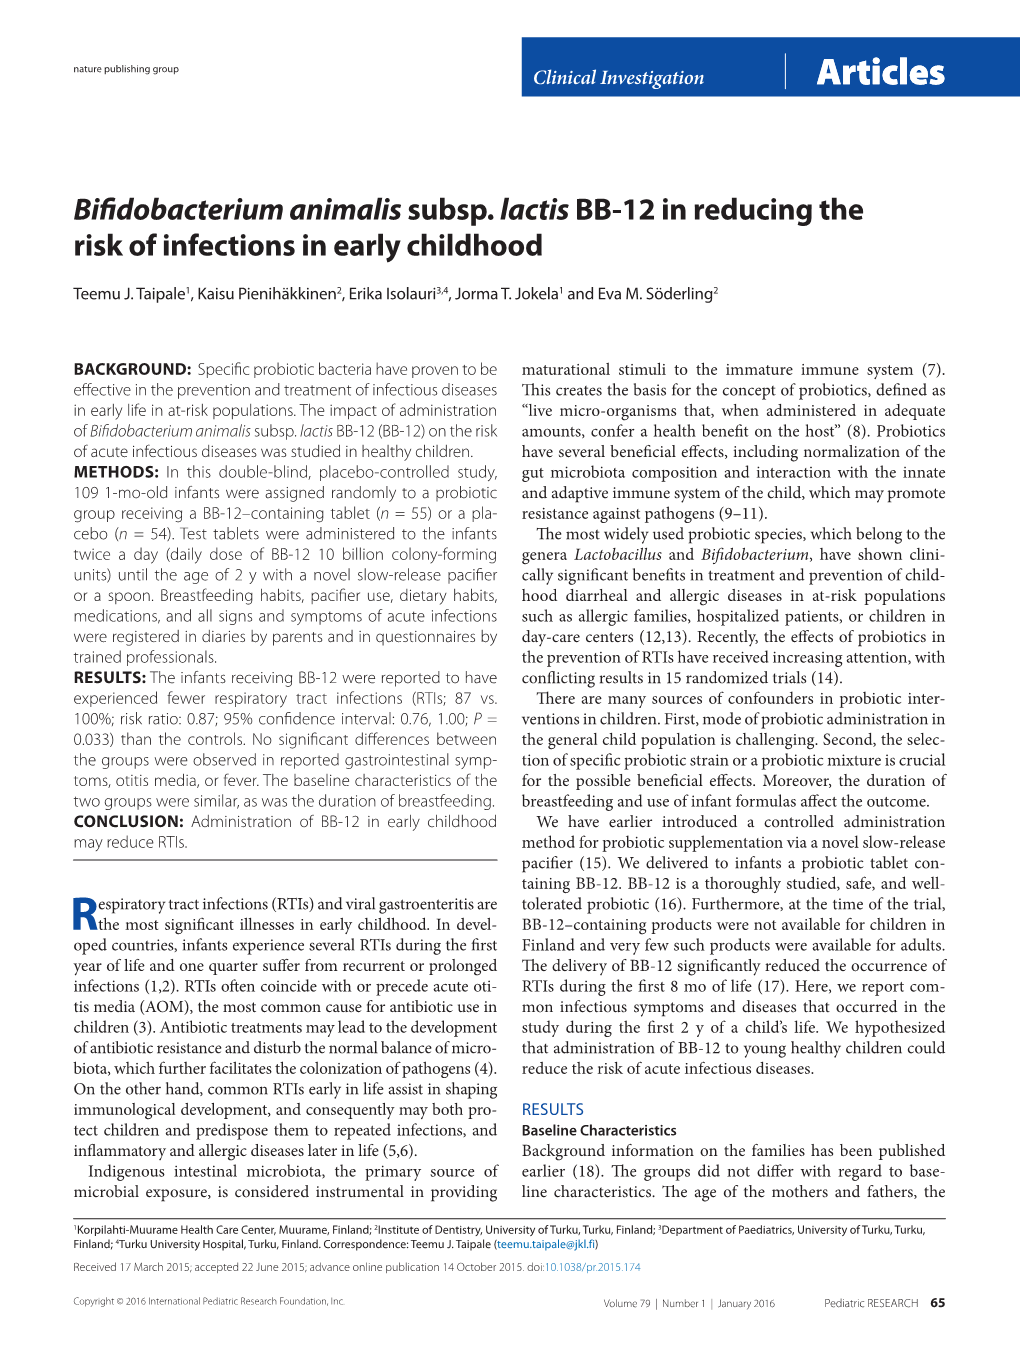 Bifidobacterium Animalis Subsp. Lactis BB-12 in Reducing the Risk of Infections in Early Childhood